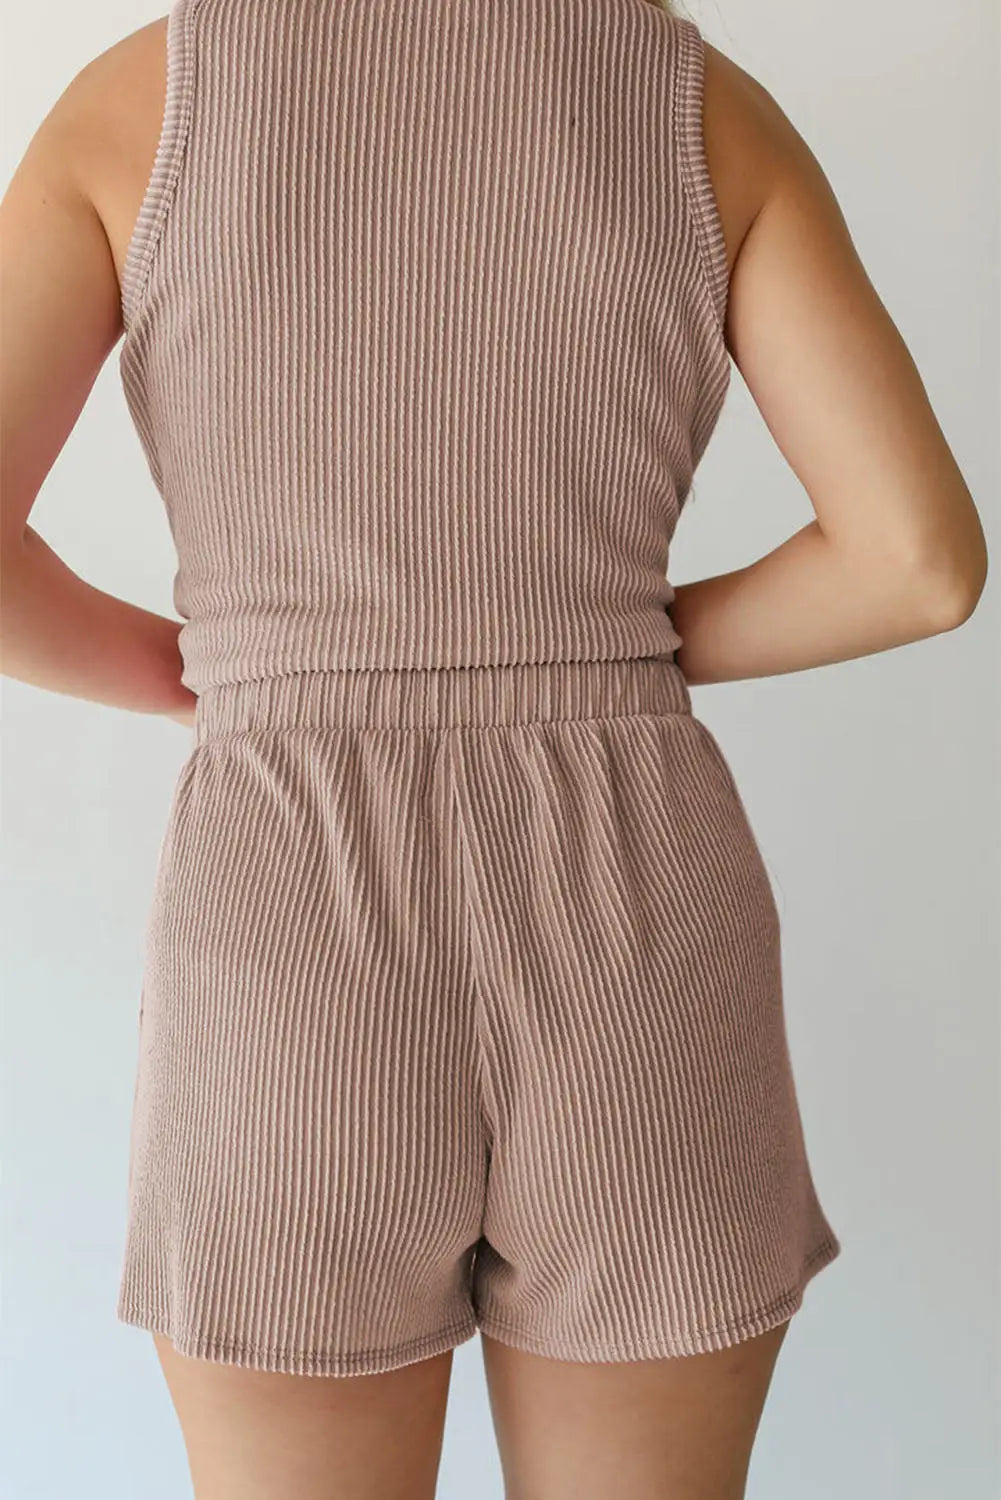 Corded tank top and shorts set - two piece sets